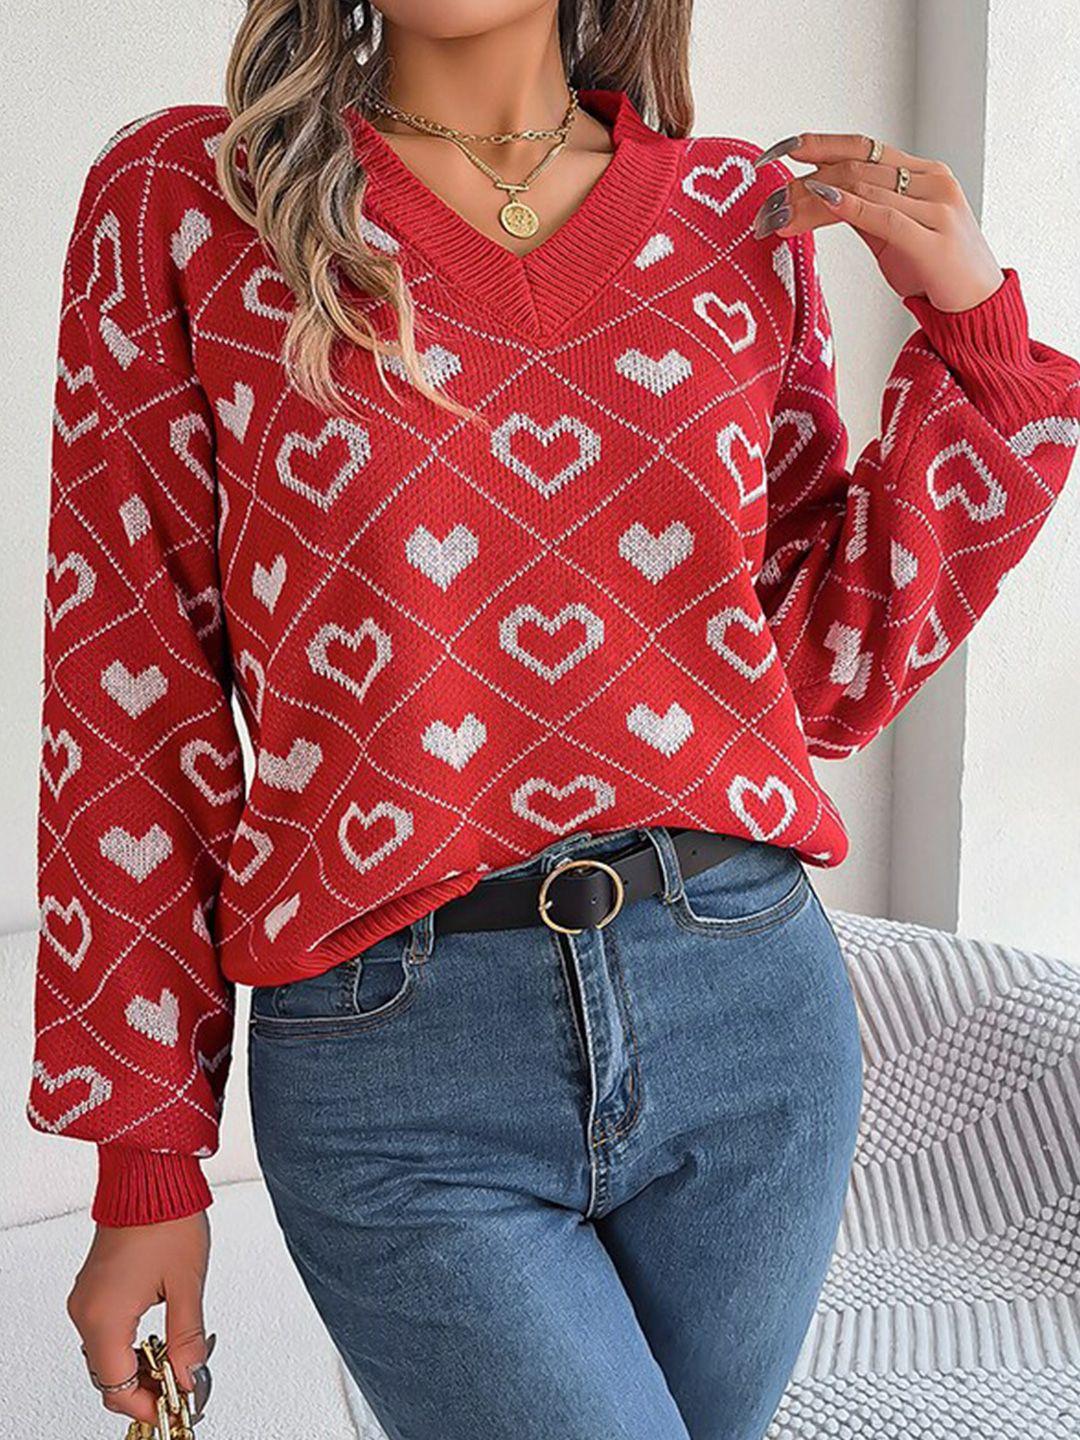 stylecast-women-red-printed-pullover